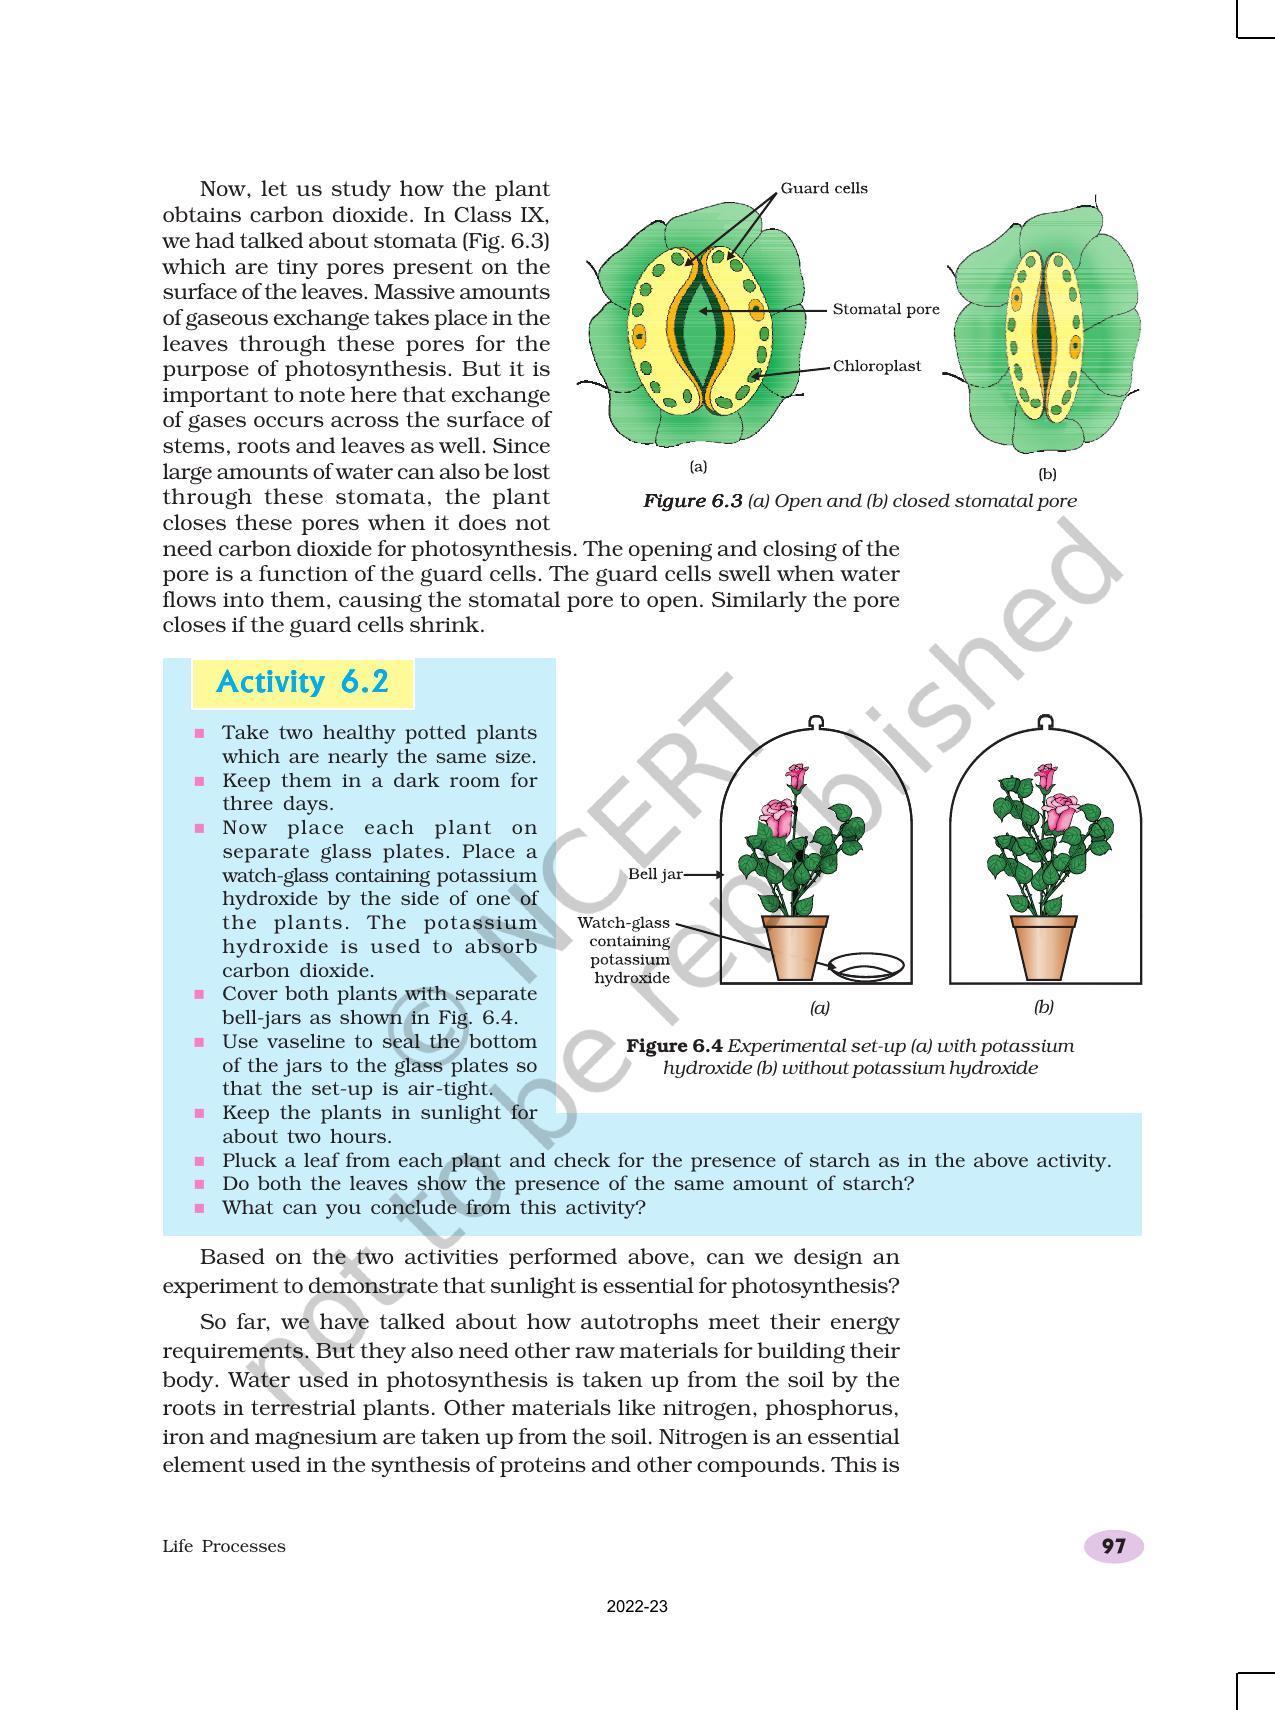 NCERT Book for Class 10 Science Chapter 6 Life Processes - Page 5